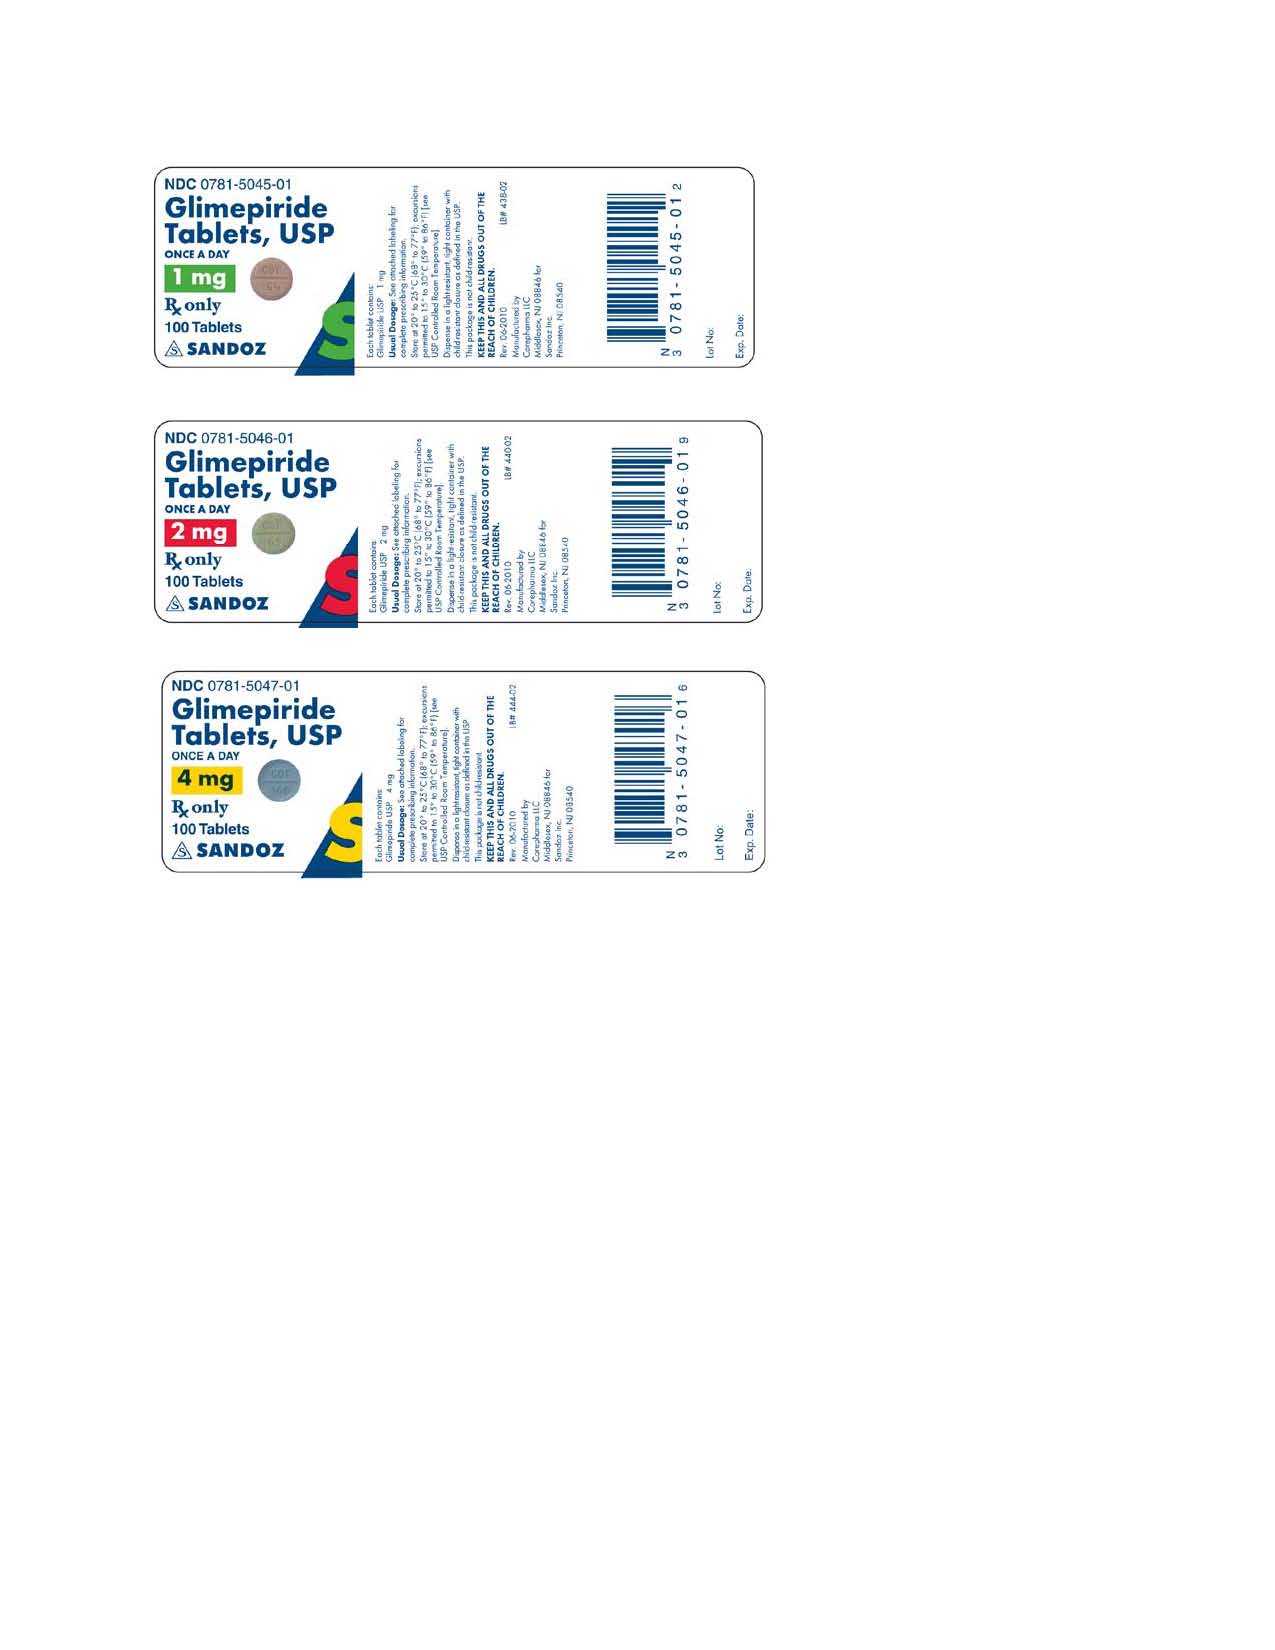 Container Labels - Glimepiride Tablets 1 mg, 2 mg and 4 mg